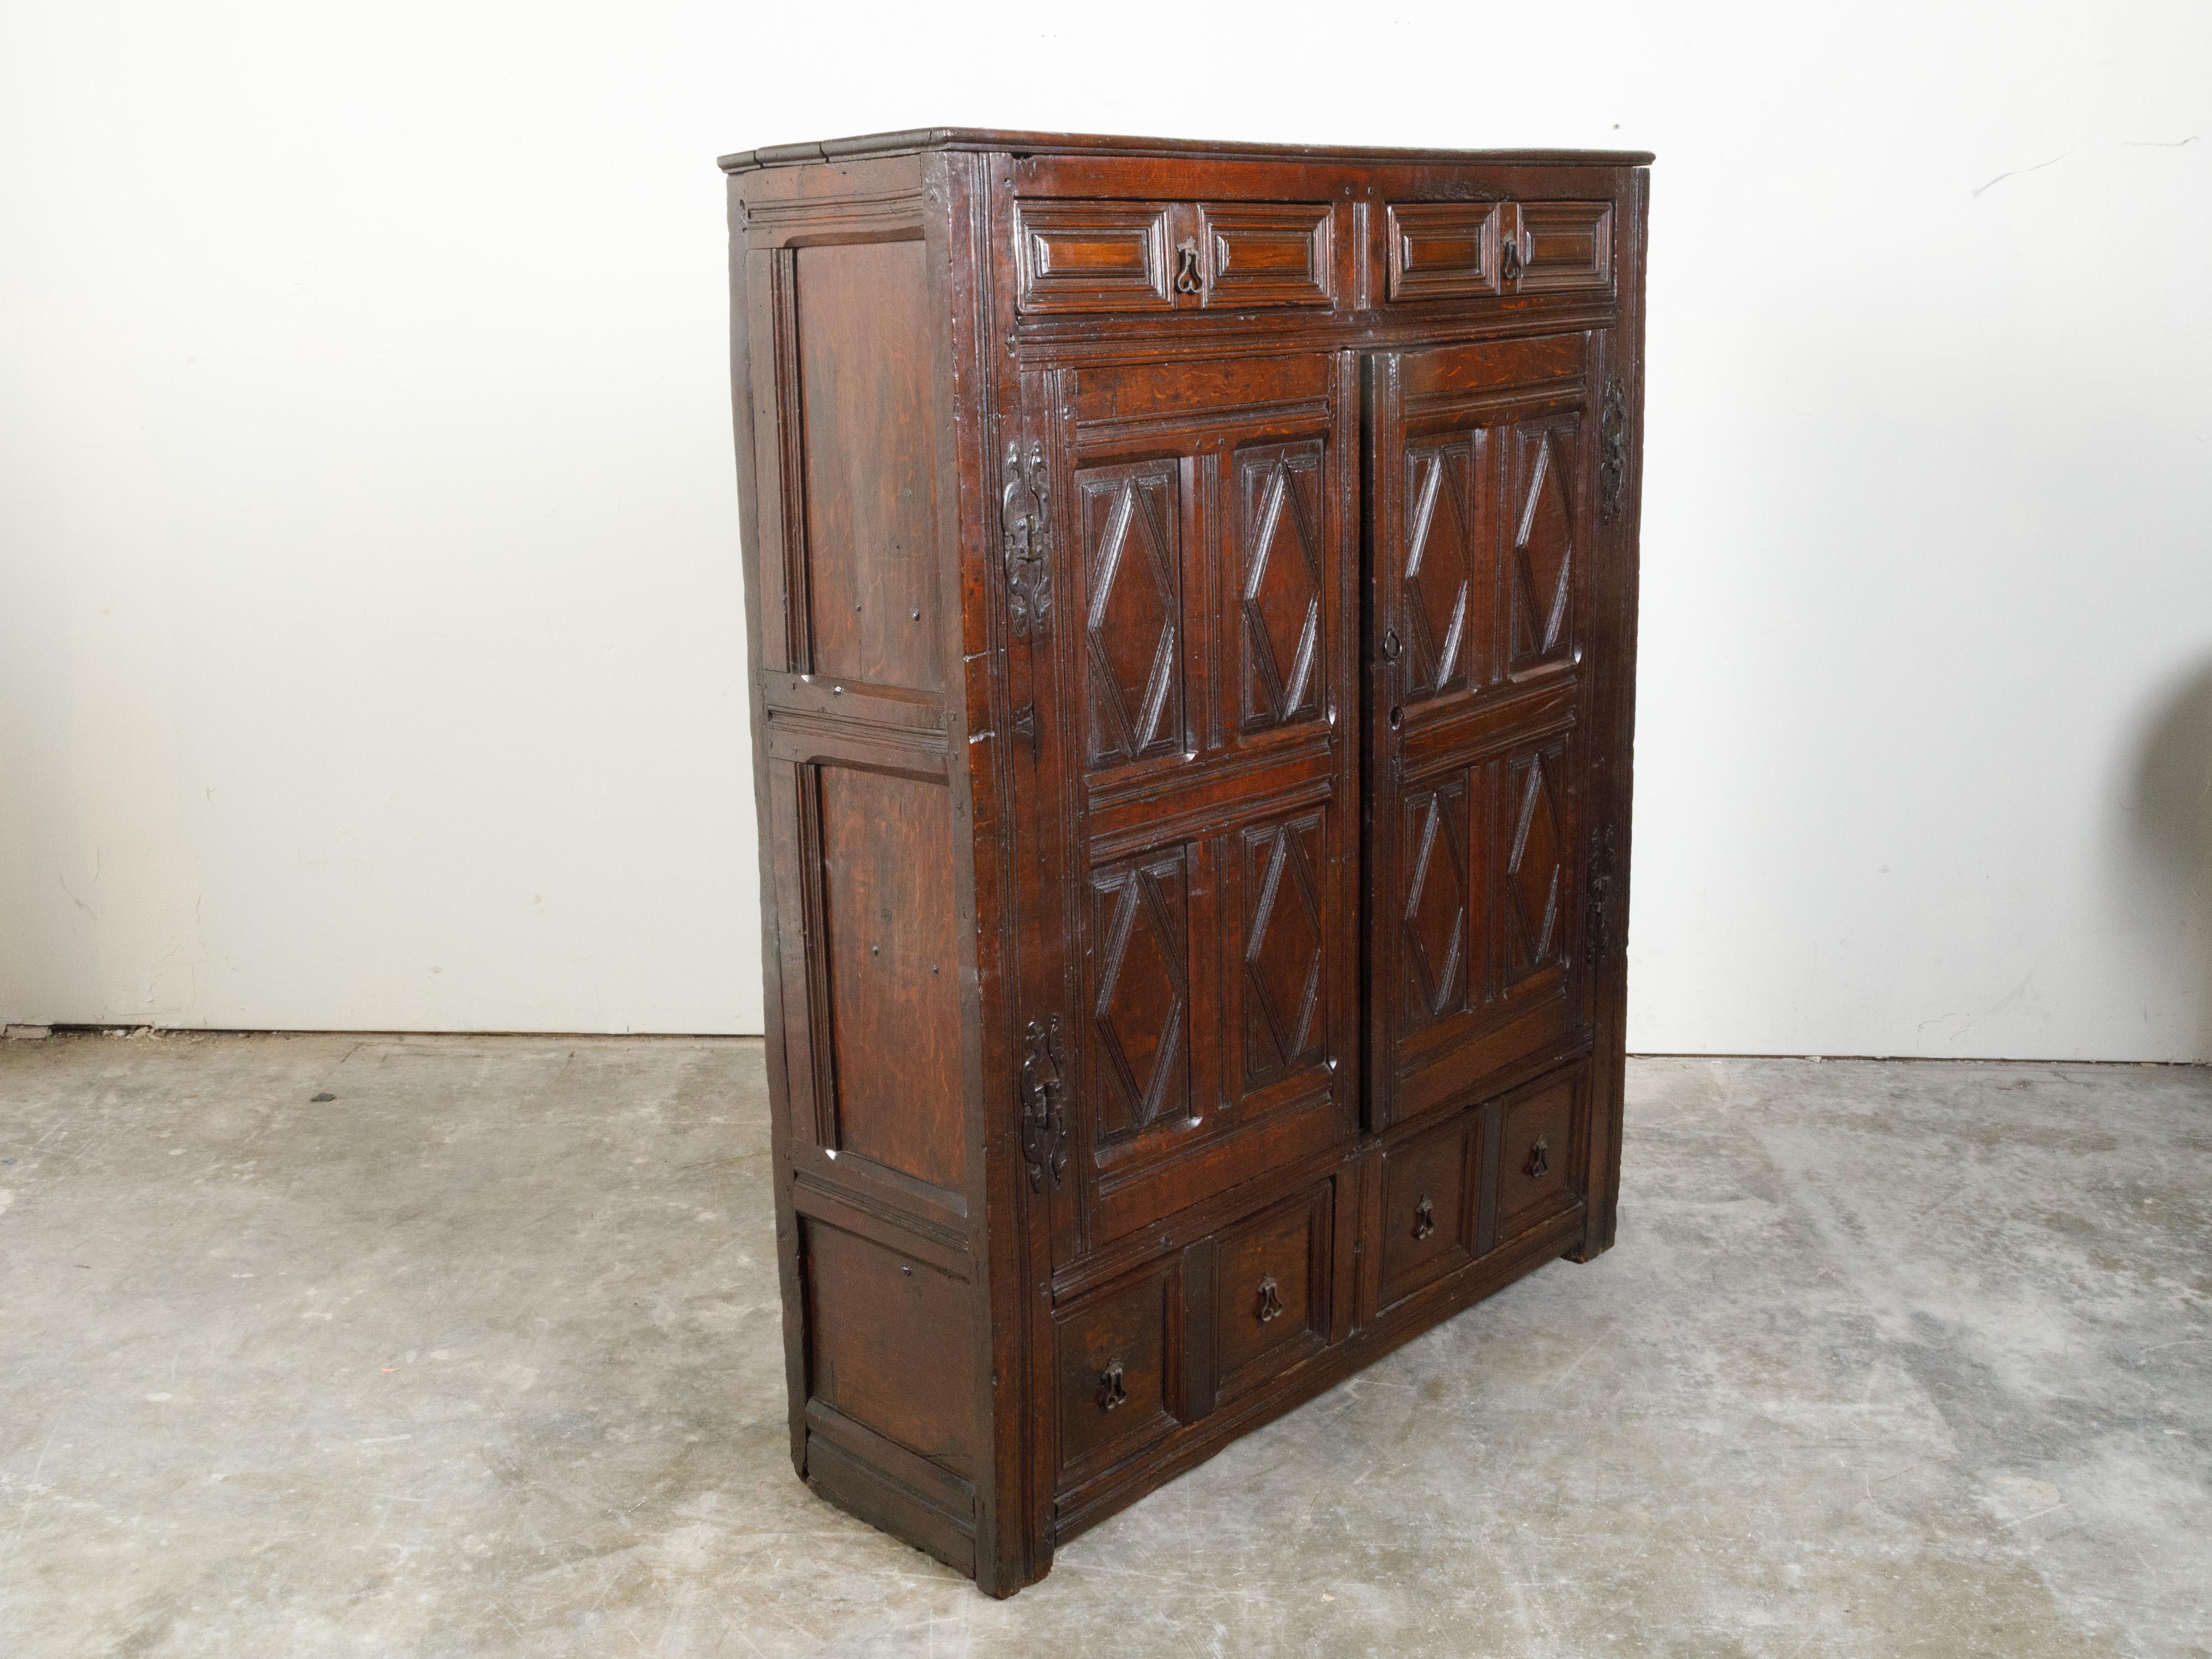 English 1800s Wooden Court Cupboard with Doors, Drawers and Diamond Motifs For Sale 3